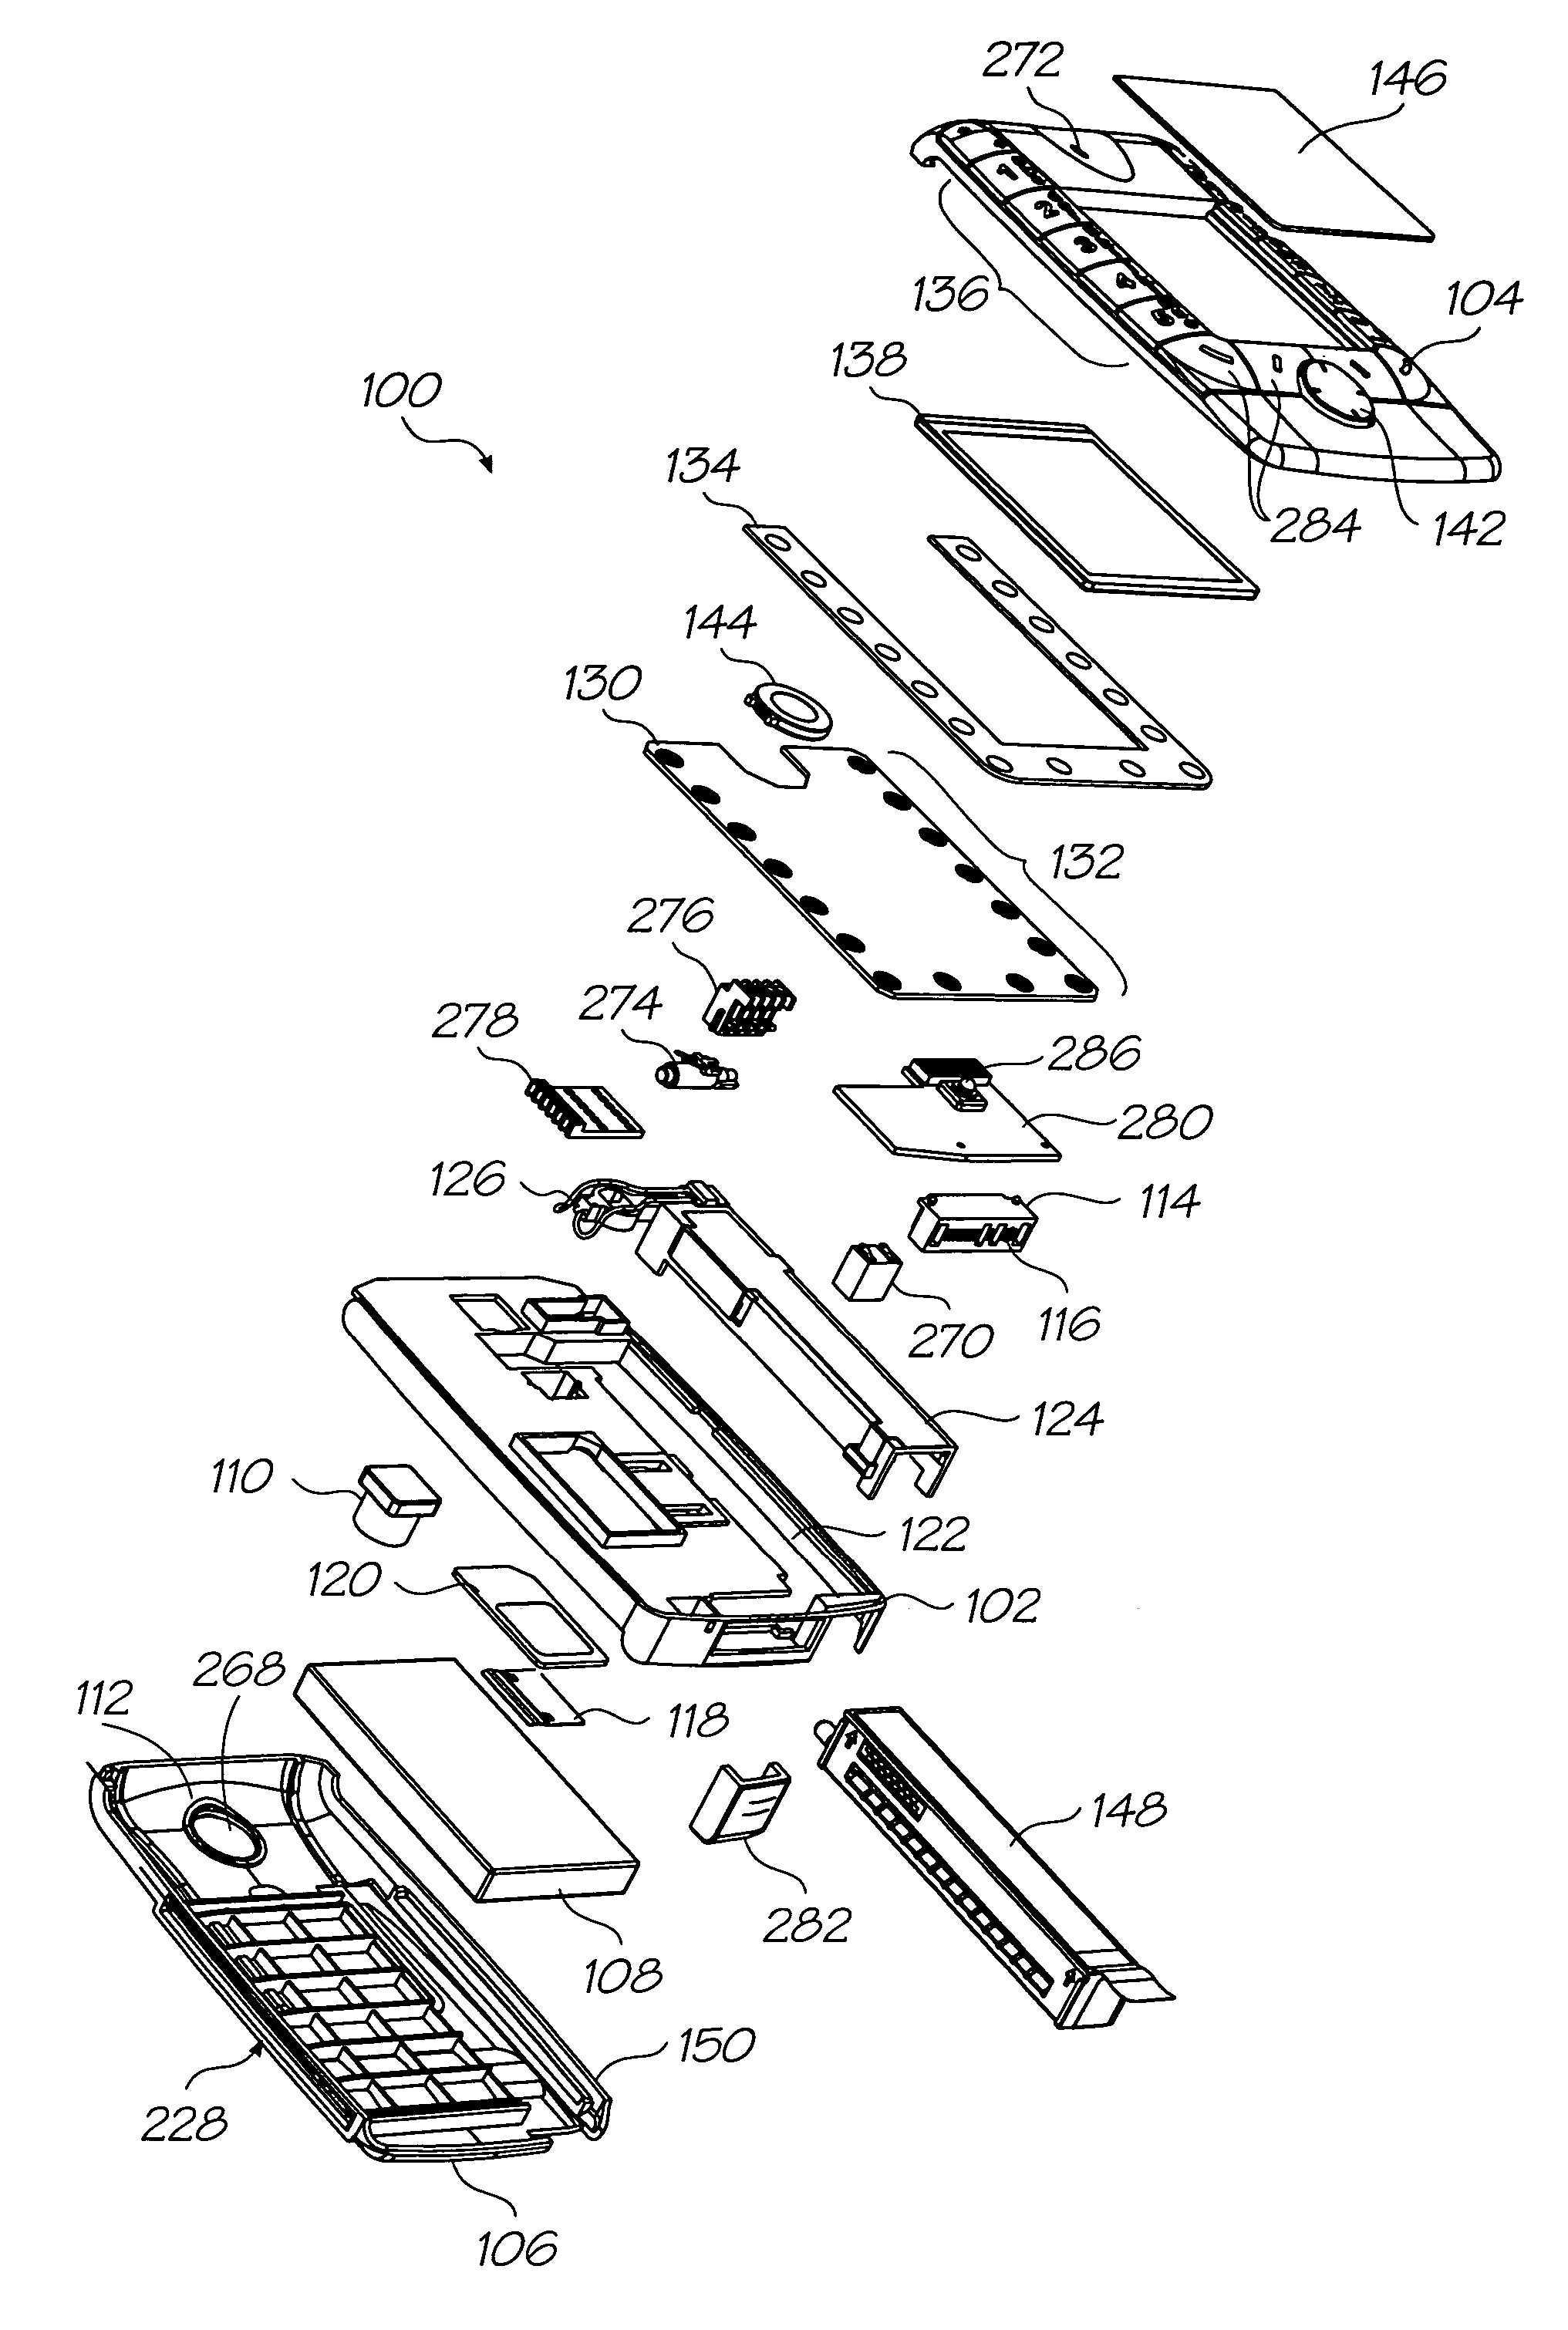 Mobile telecommunications device with media edge detection